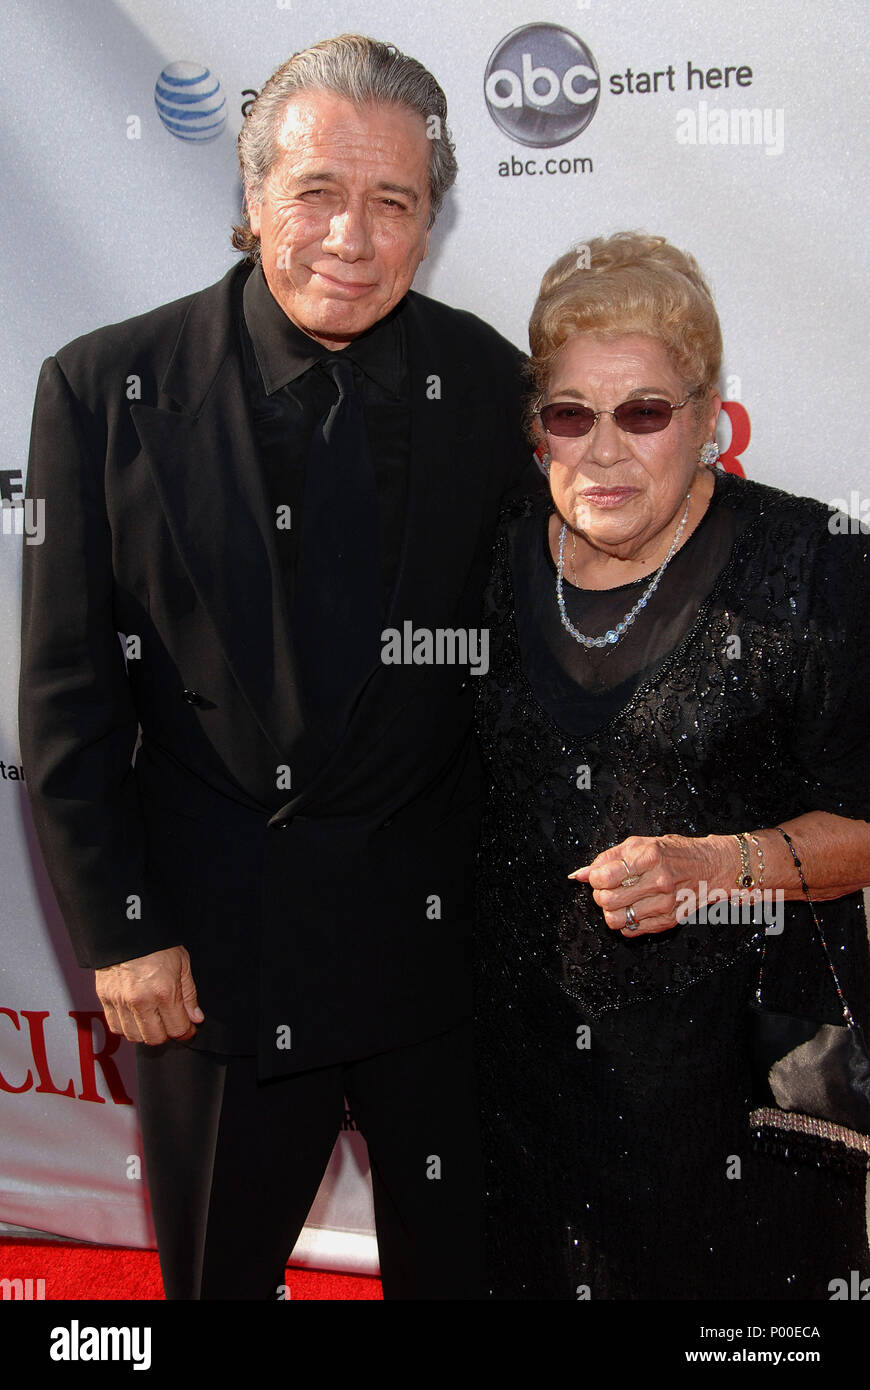 Edward James Olmos and mom Eleonor -  ALMA Awards at the Pasadena Civic Center Auditorium  in Los Angeles.  three quarters eye contact OlmosJames mom 44  Event in Hollywood Life - California, Red Carpet Event, USA, Film Industry, Celebrities, Photography, Bestof, Arts Culture and Entertainment, Celebrities fashion, Best of, Hollywood Life, Event in Hollywood Life - California, Red Carpet and backstage, Music celebrities, Topix, Couple, family ( husband and wife ) and kids- Children, brothers and sisters inquiry tsuni@Gamma-USA.com, Credit Tsuni / USA, 2006 to 2009 Stock Photo